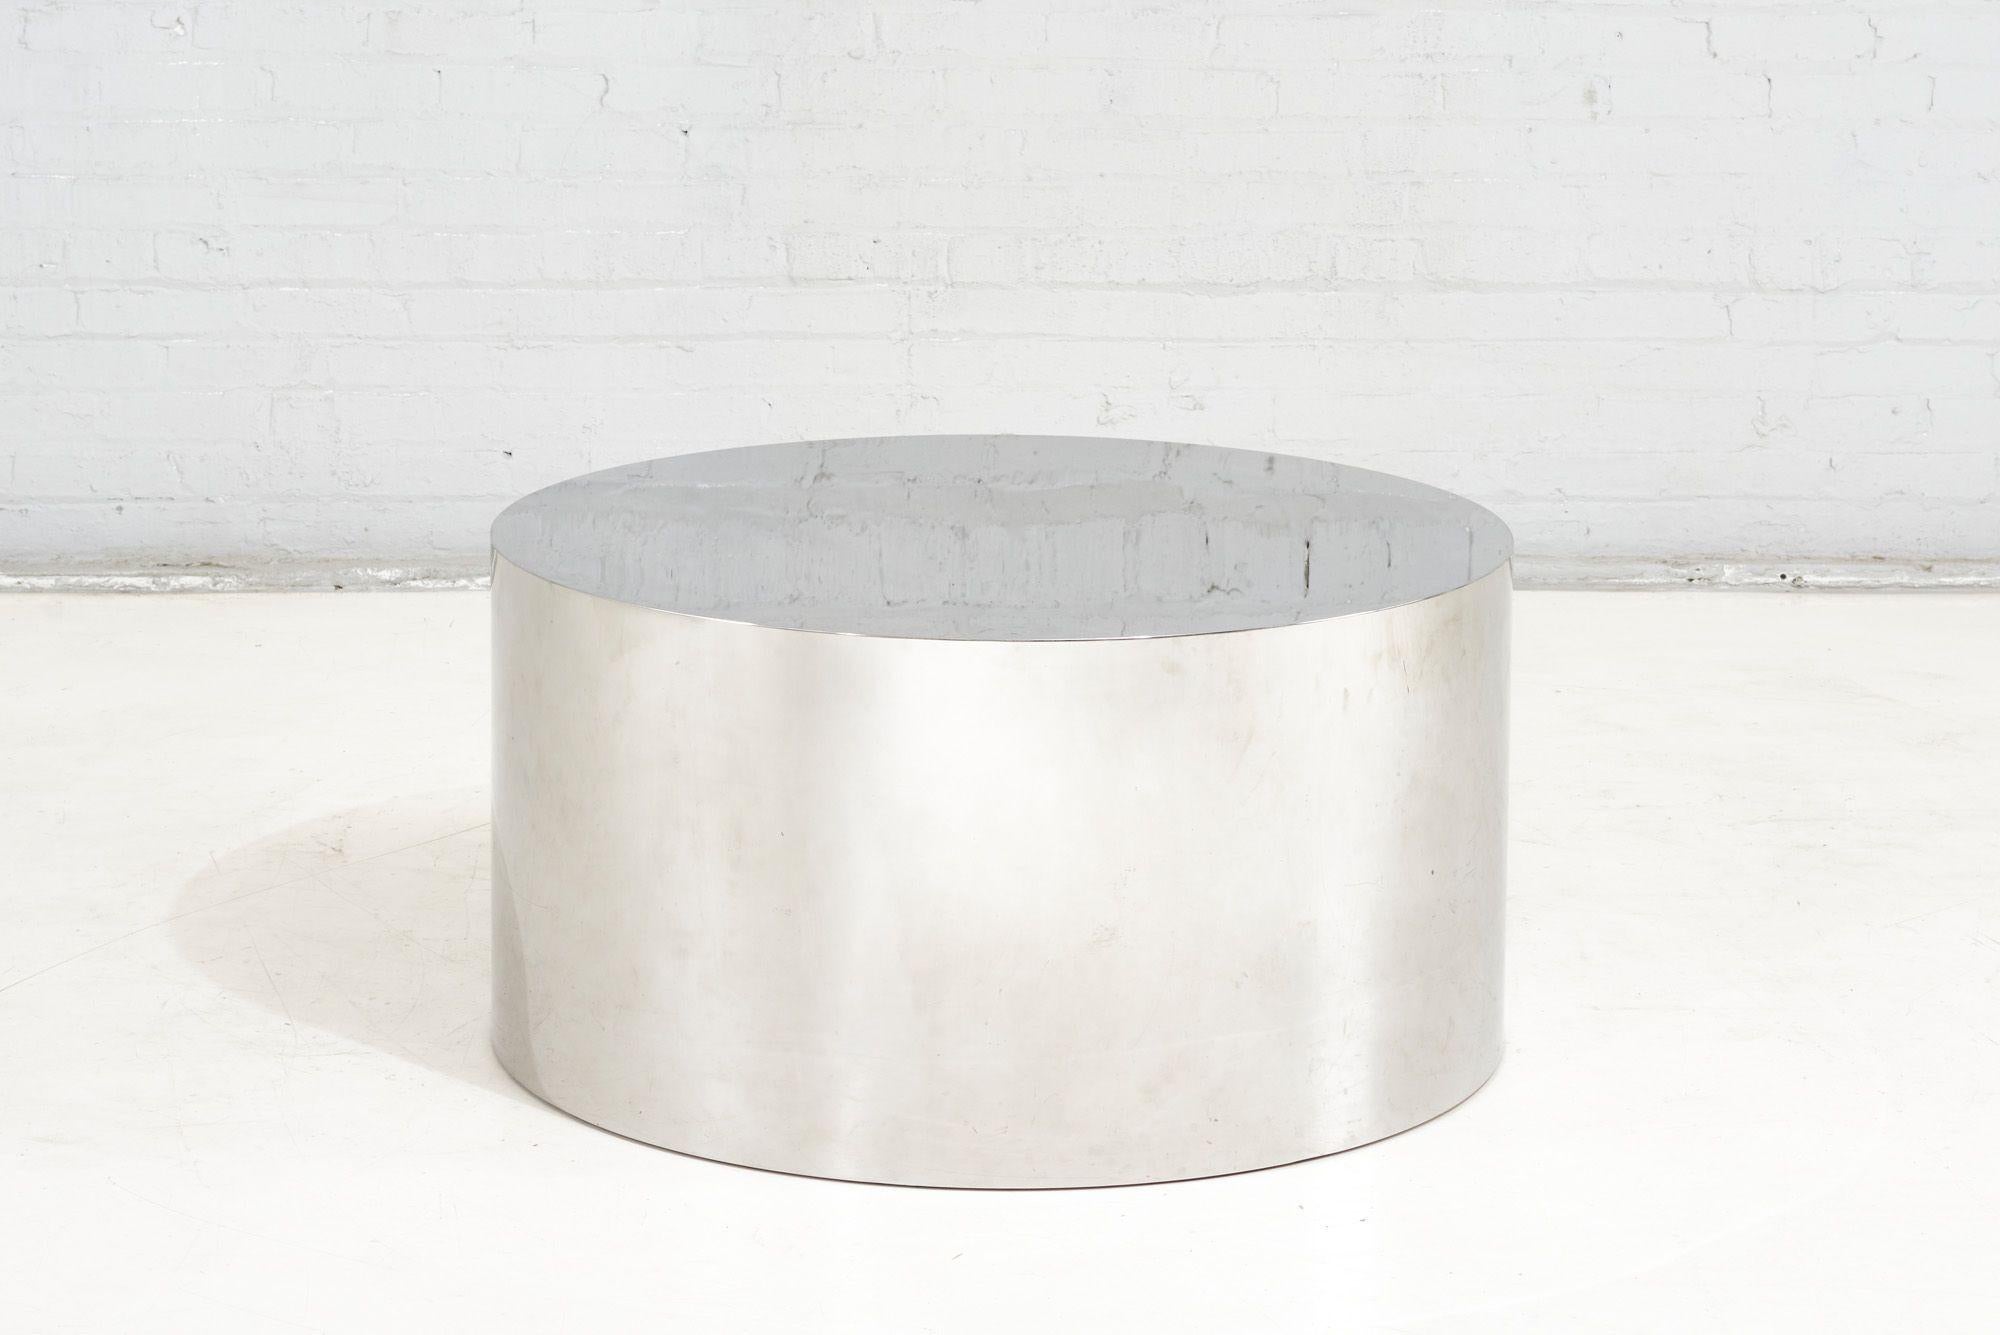 Chrome Drum coffee/end table by Milo Baughman for Thayer Coggin, 1960. Original, wear consistent with age and use.